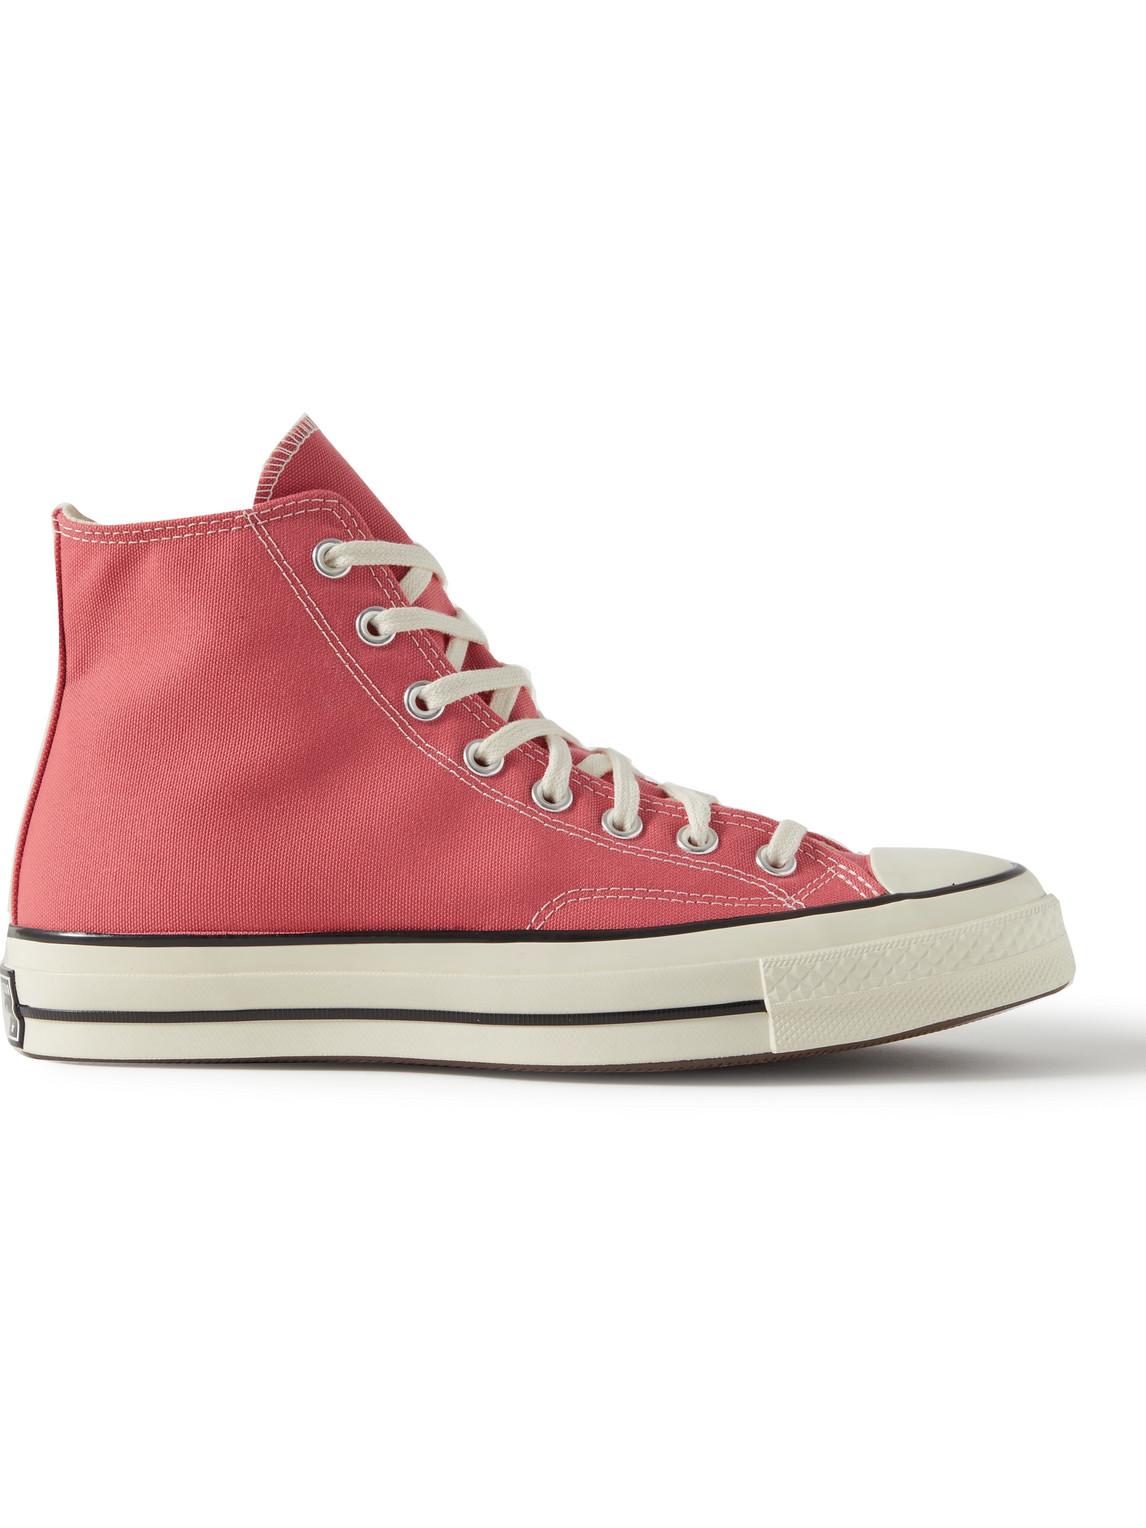 Converse Chuck 70 Recycled Canvas High-top Sneakers in Pink for Men - Lyst